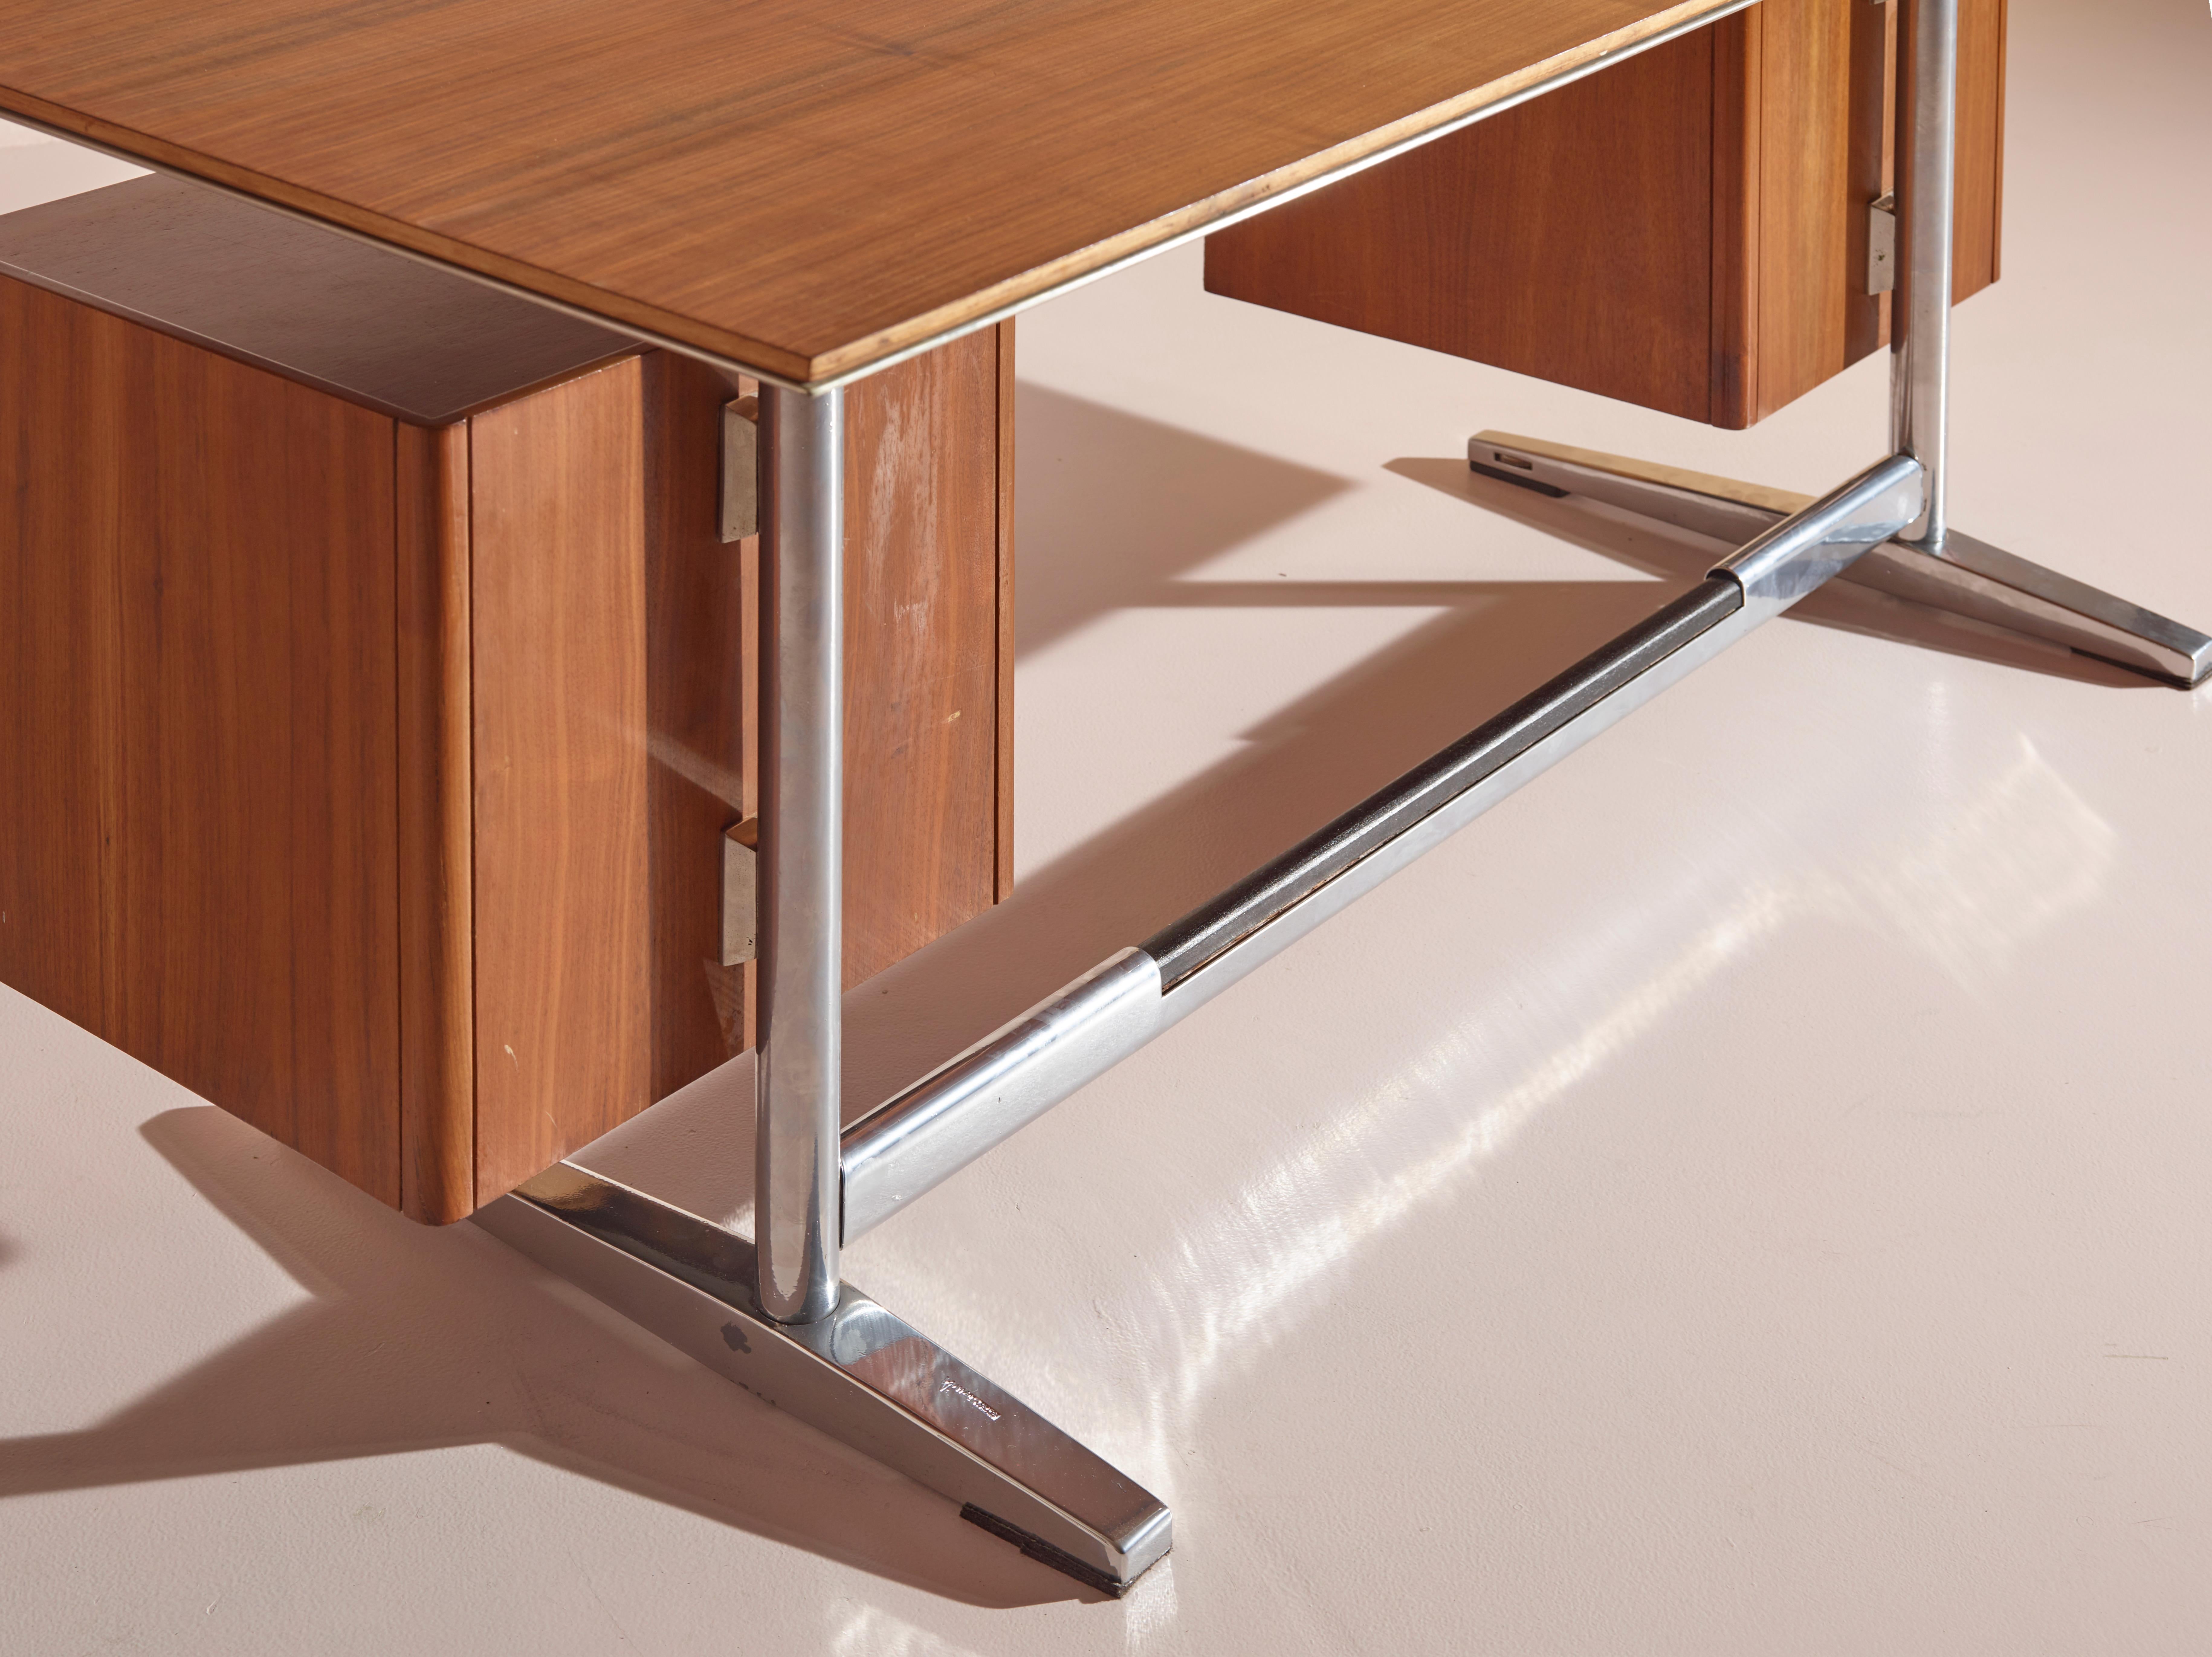 Mid-Century Modern Gio Ponti Desk for RIMA Made in Walnut, Chromed Steel and Plastic. Italy, 1950s For Sale